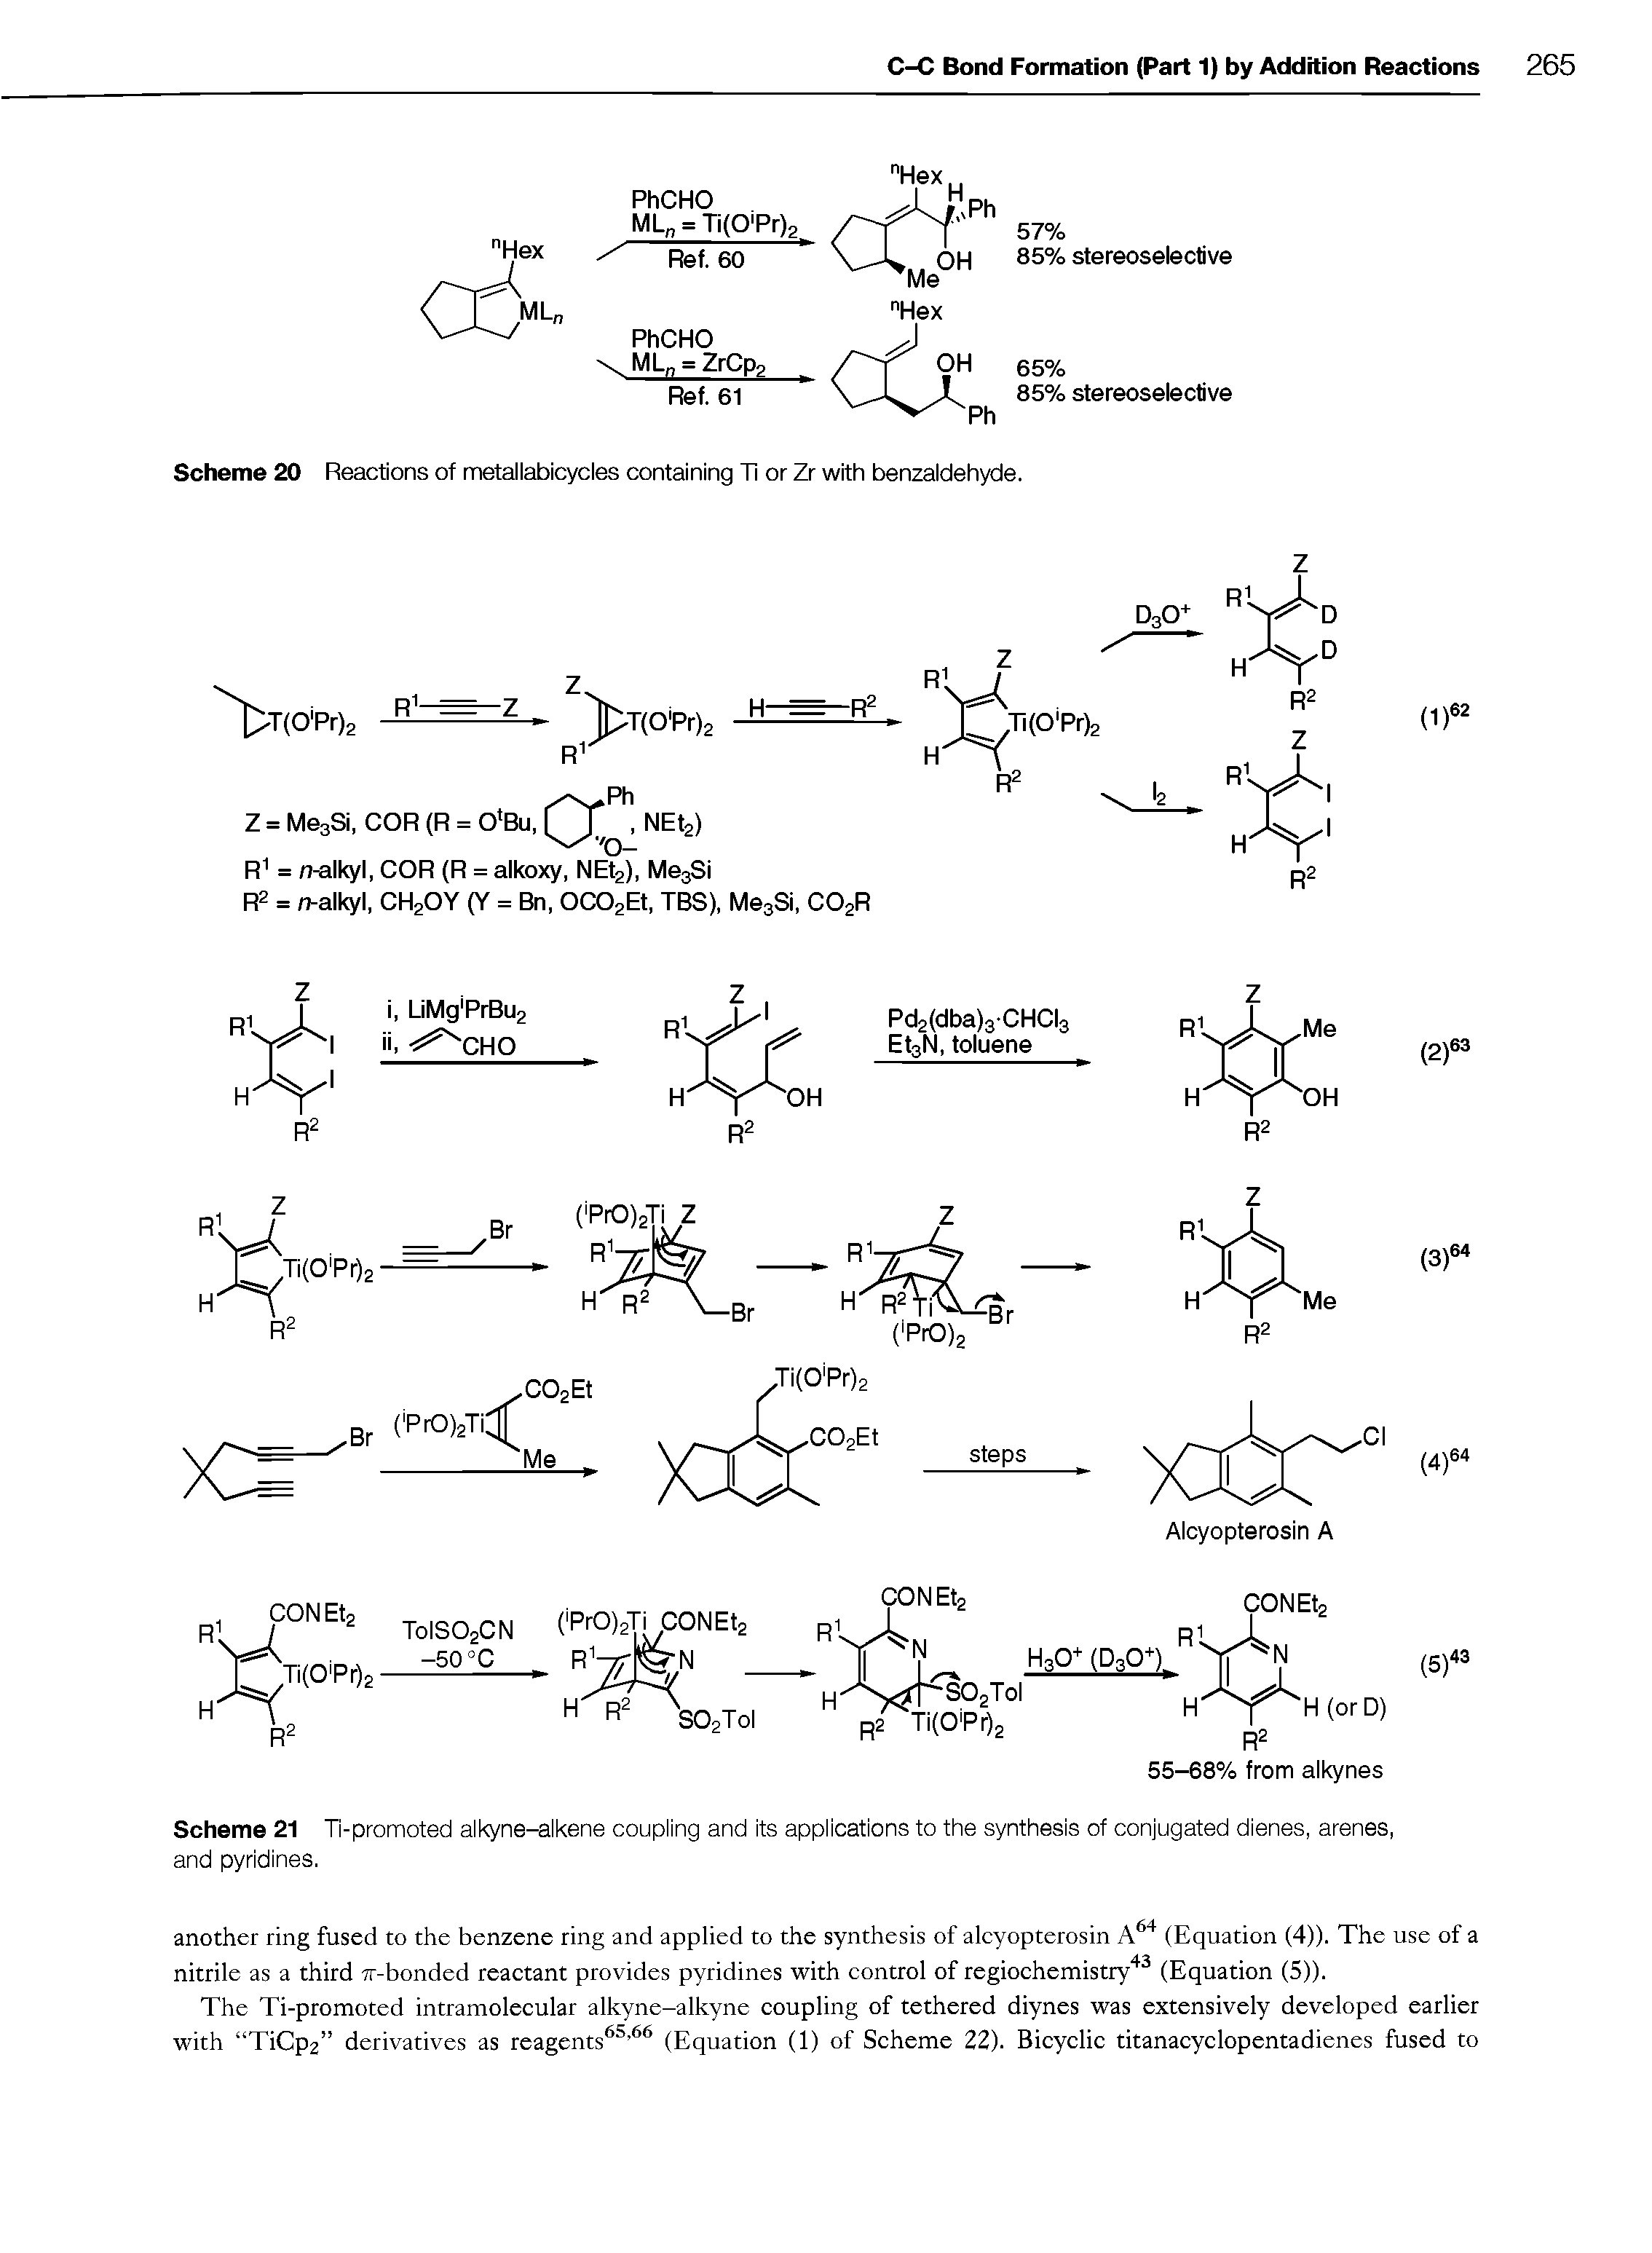 Scheme 21 Ti-promoted alkyne-alkene coupling and its applications to the synthesis of conjugated dienes, arenes, and pyridines.